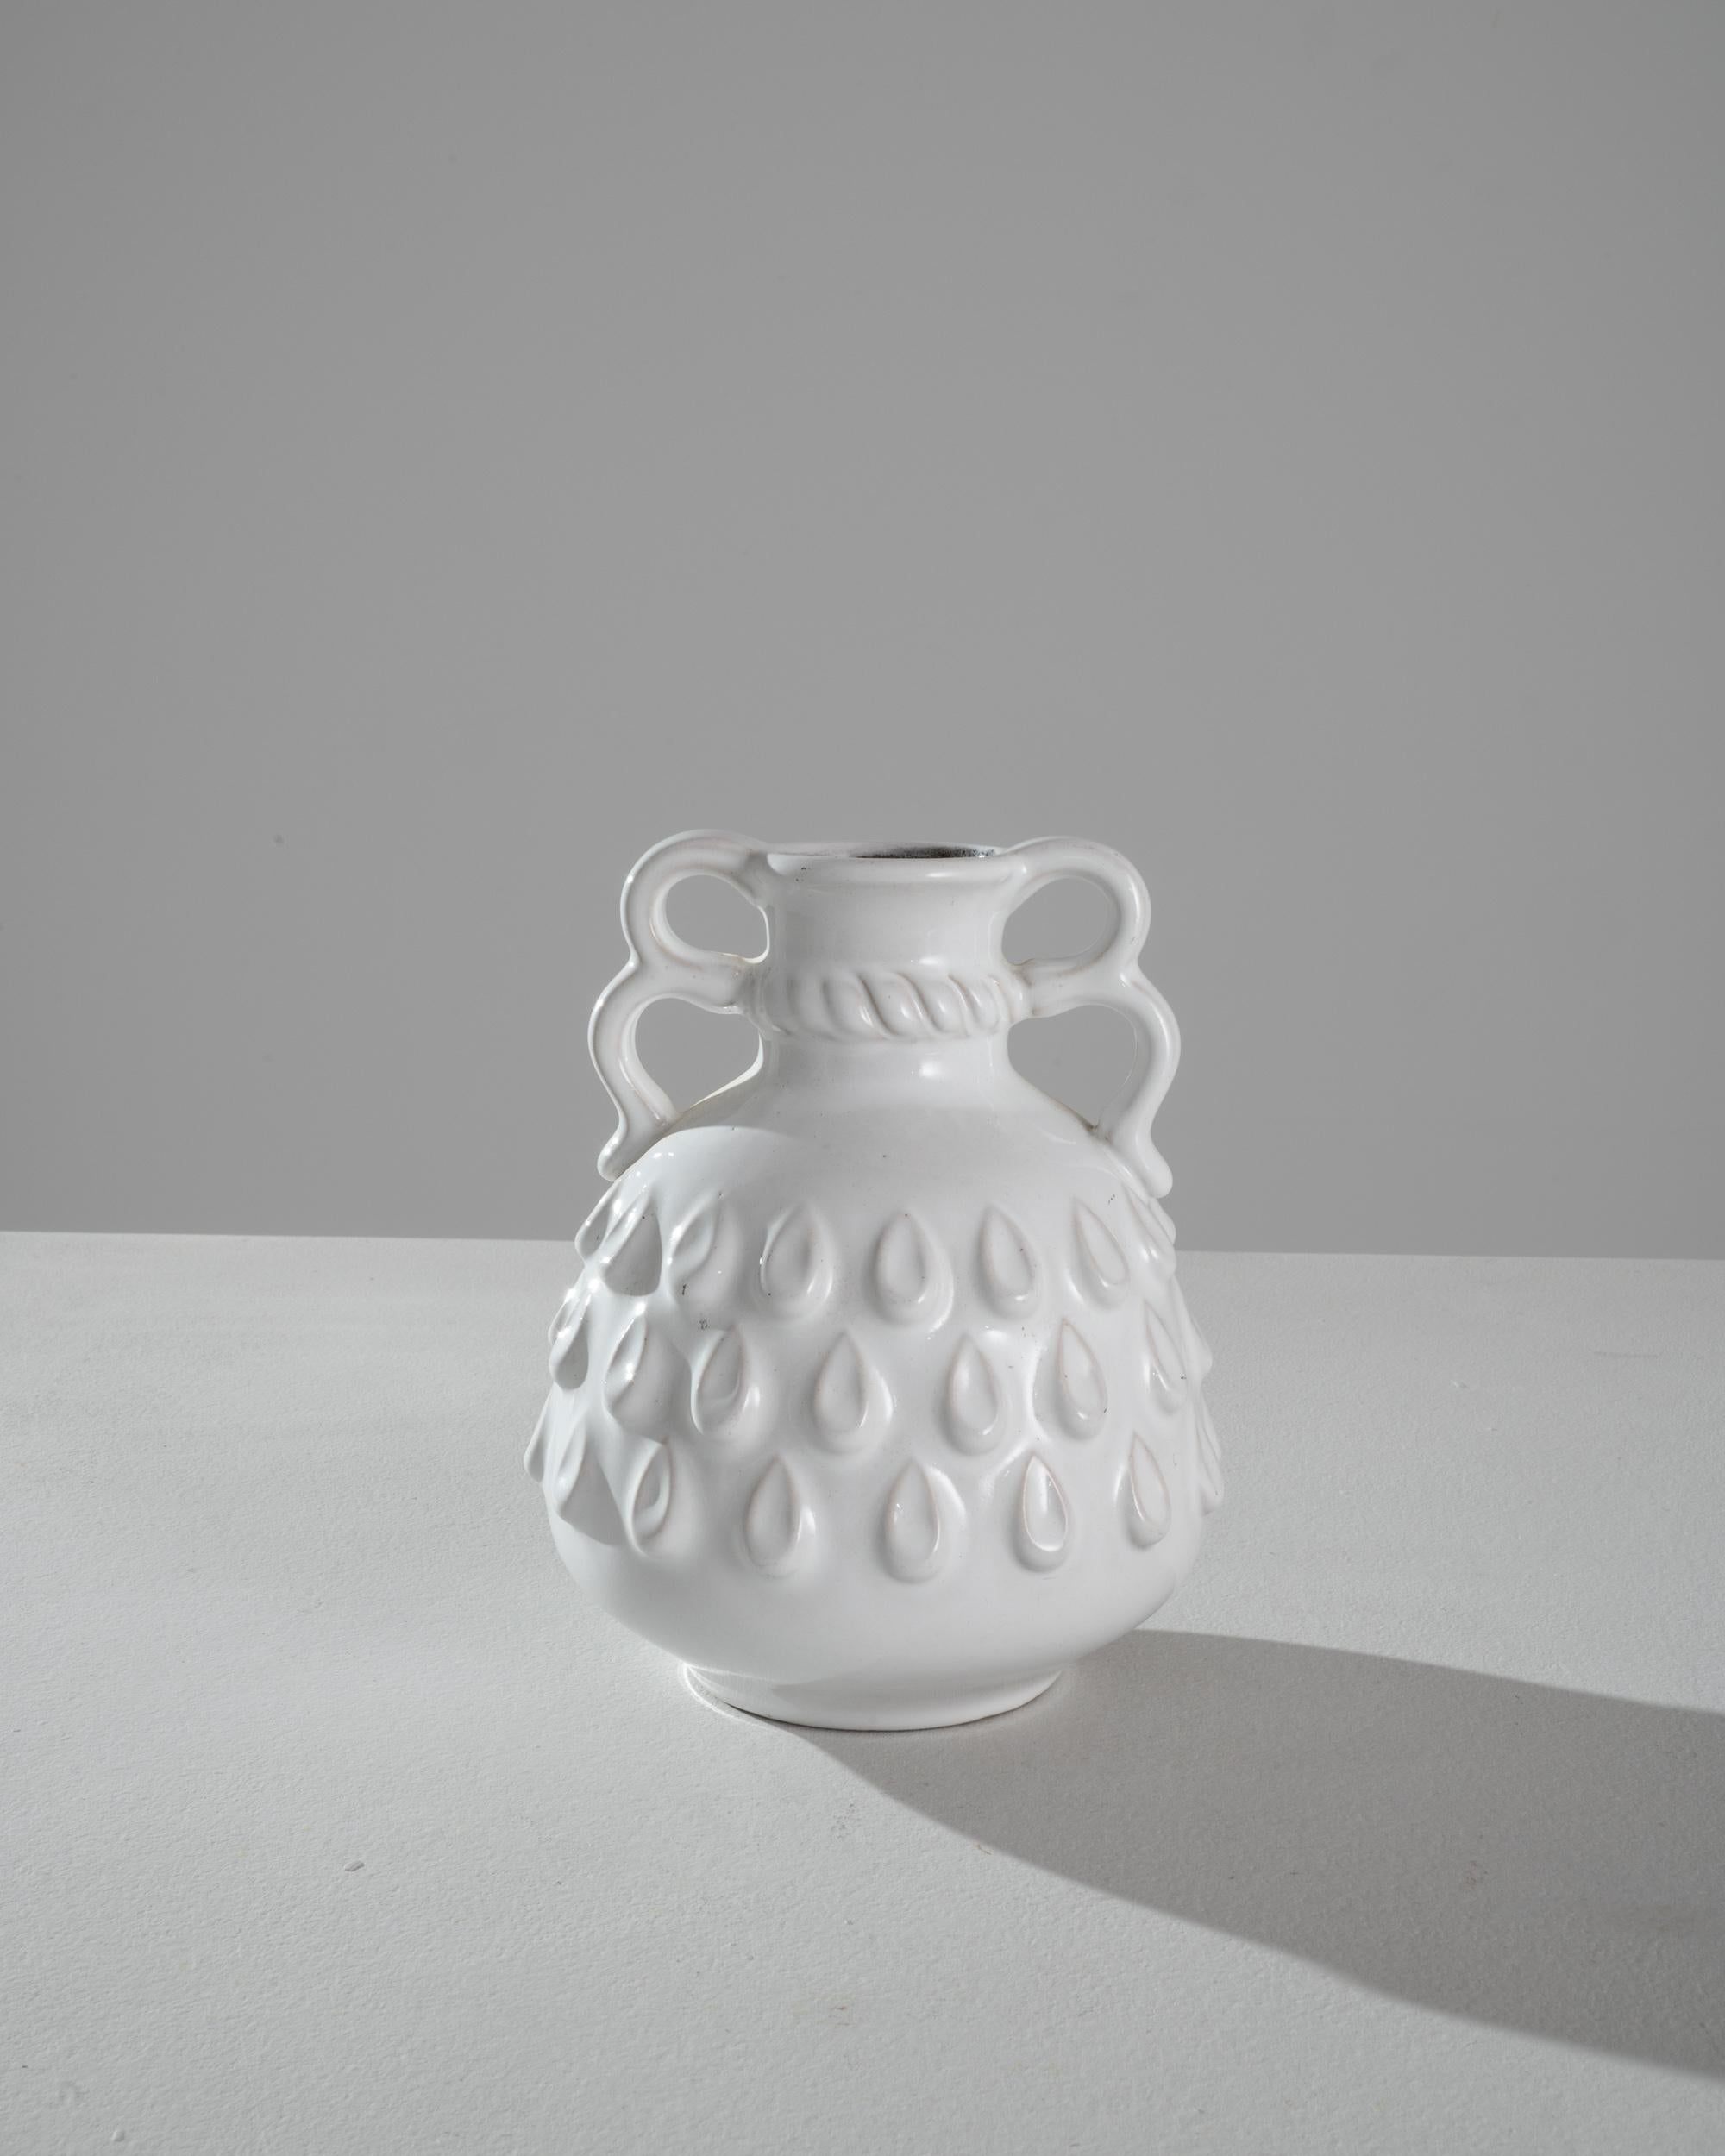 A unique shape gives this ceramic vase an intriguing character and an easy-going charm. Made in Germany in the 20th century, the silhouette is complex yet visually soothing: full curves and serpentine lines combine natural forms with artful